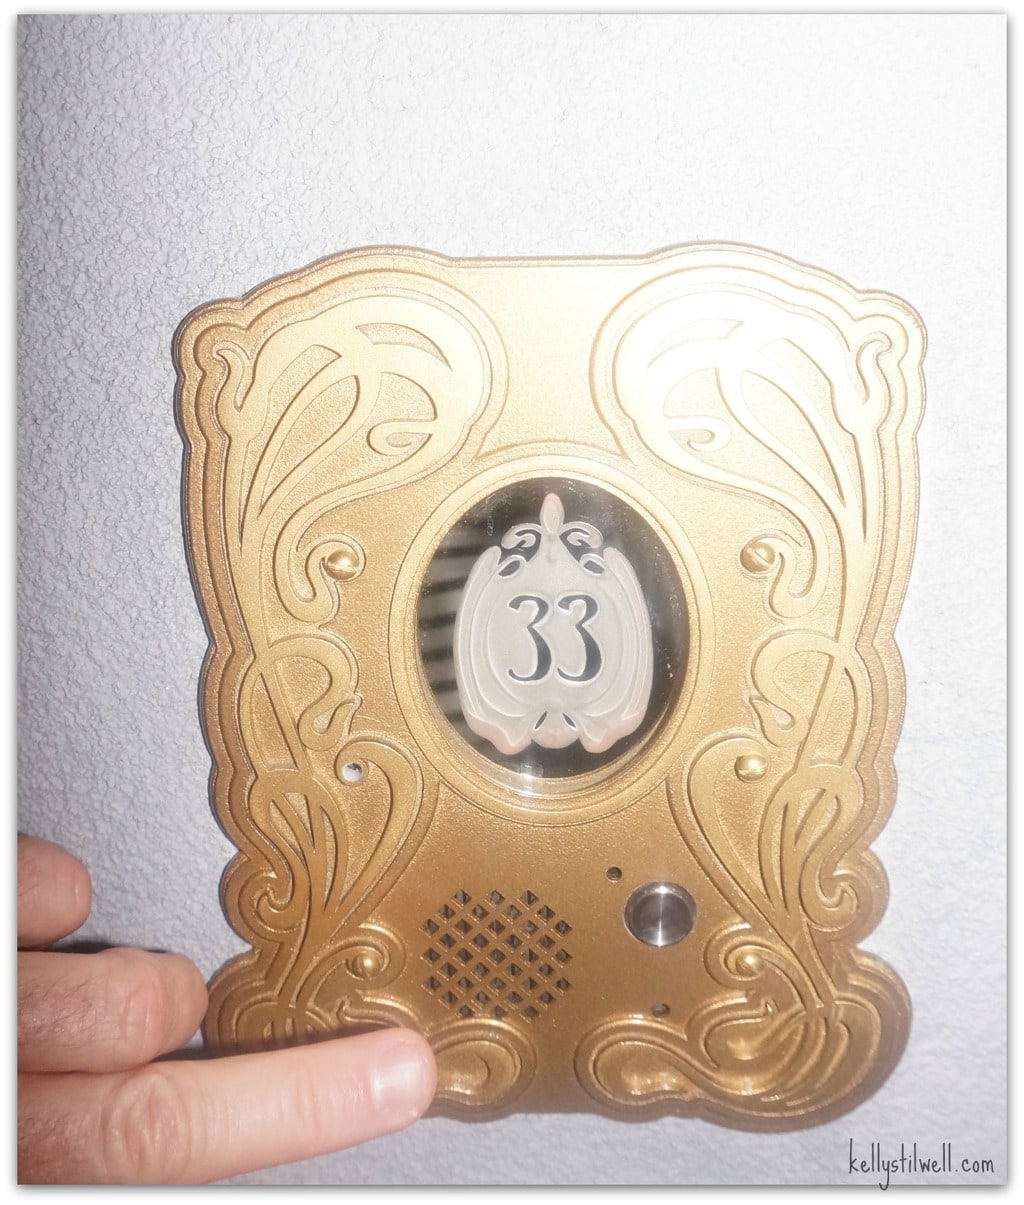 A few years ago we decided to take a California road trip with our girls. I love to travel internationally, but there is something special about a family road trip in the United States. There is so much to see right here in our beautiful country! This is the Club 33 door buzzer. 